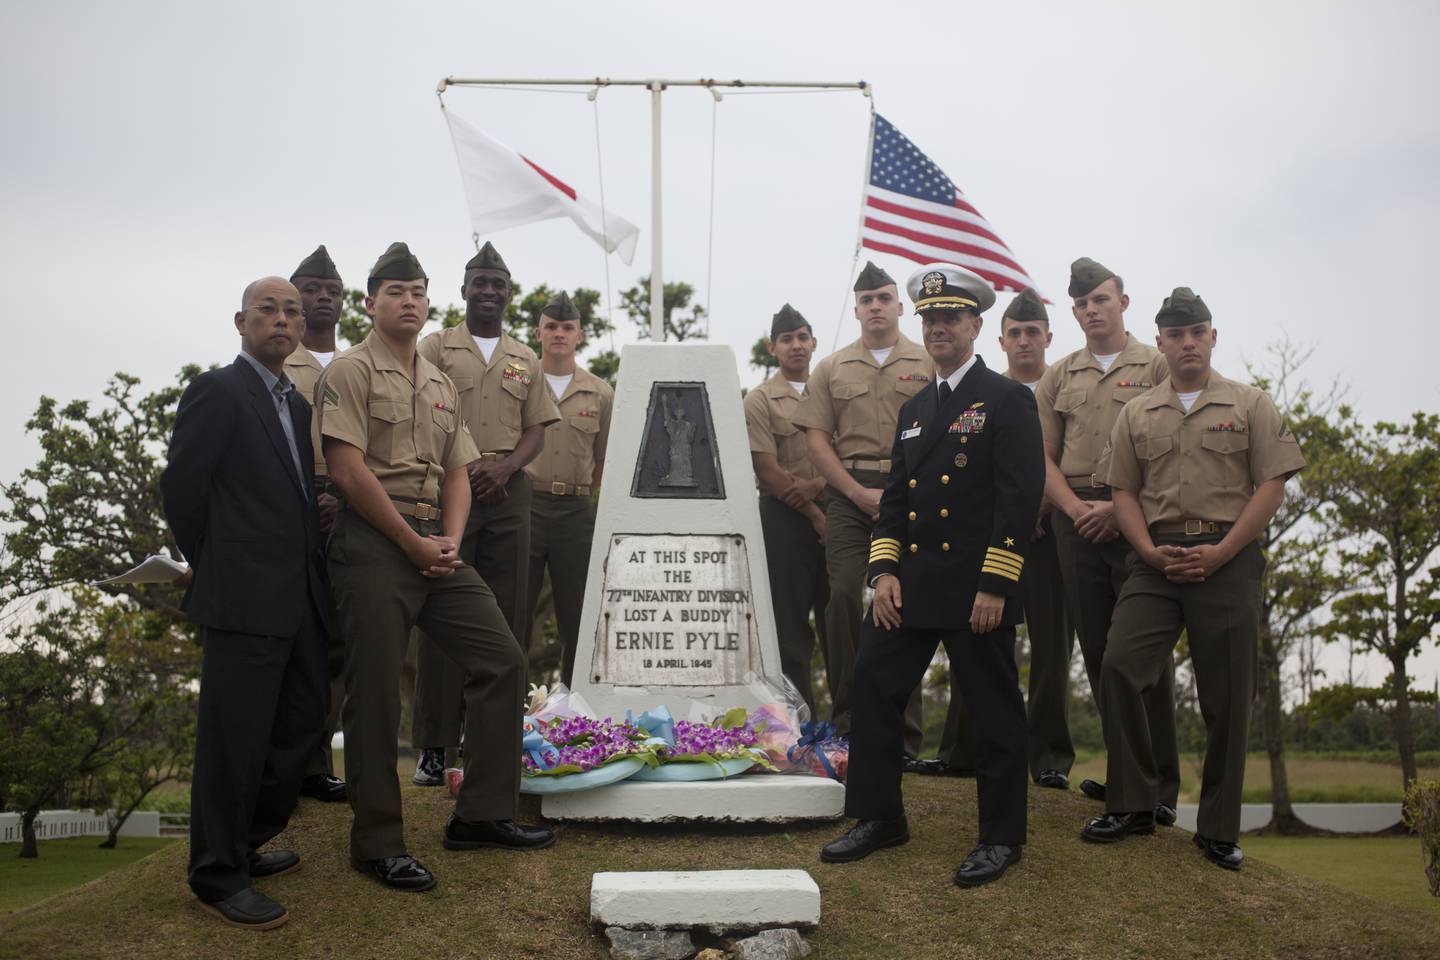 U.S. service members and an Okinawan pose for a photo at the Ernie Pyle Memorial after the memorial ceremony on Ie Shima, Okinawa, Japan, April 14, 2013.